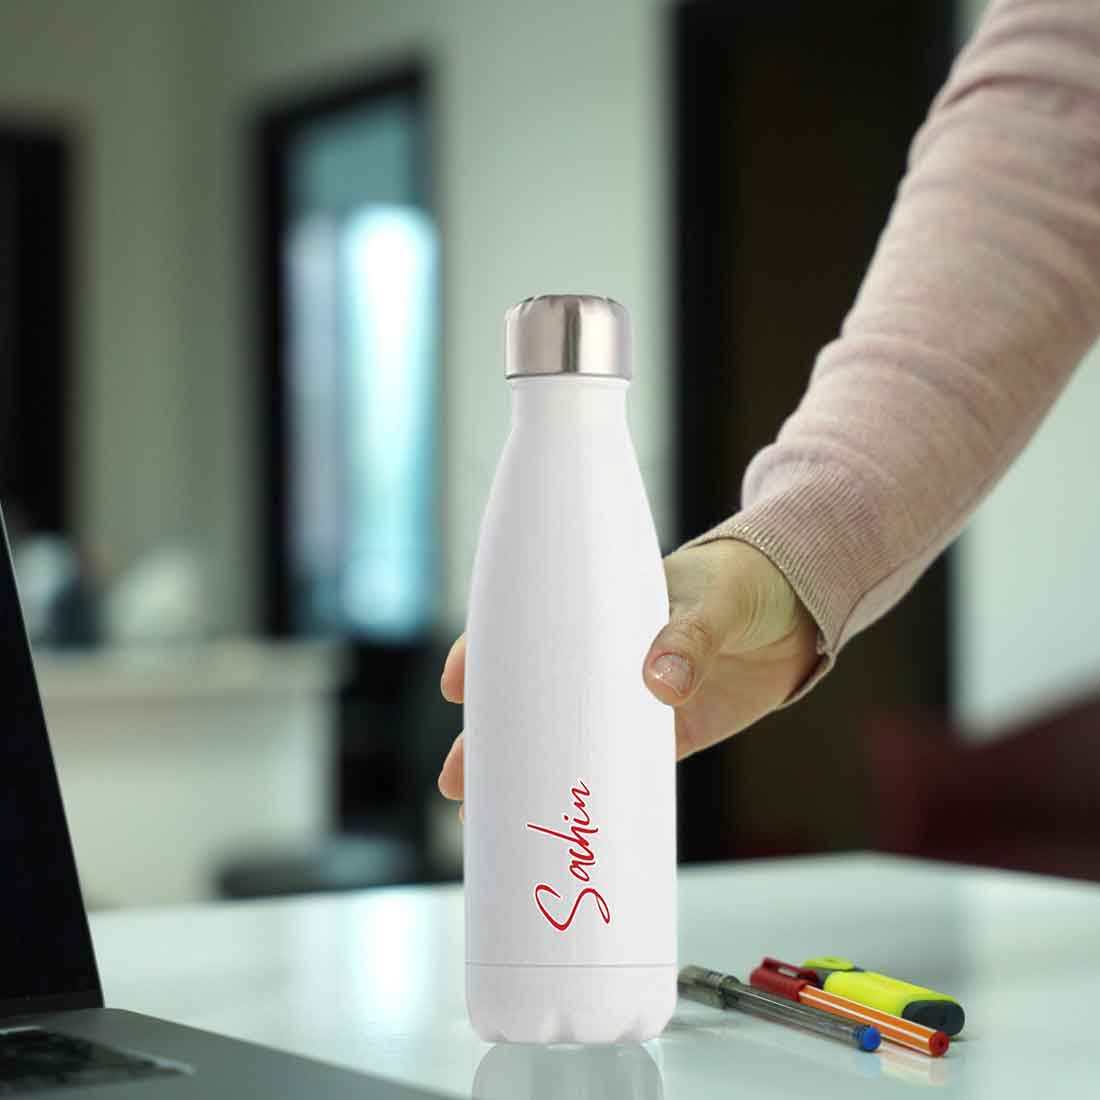 Customized Bottle with Name - Stainless Steel Insulated Cola Shape Water Bottle